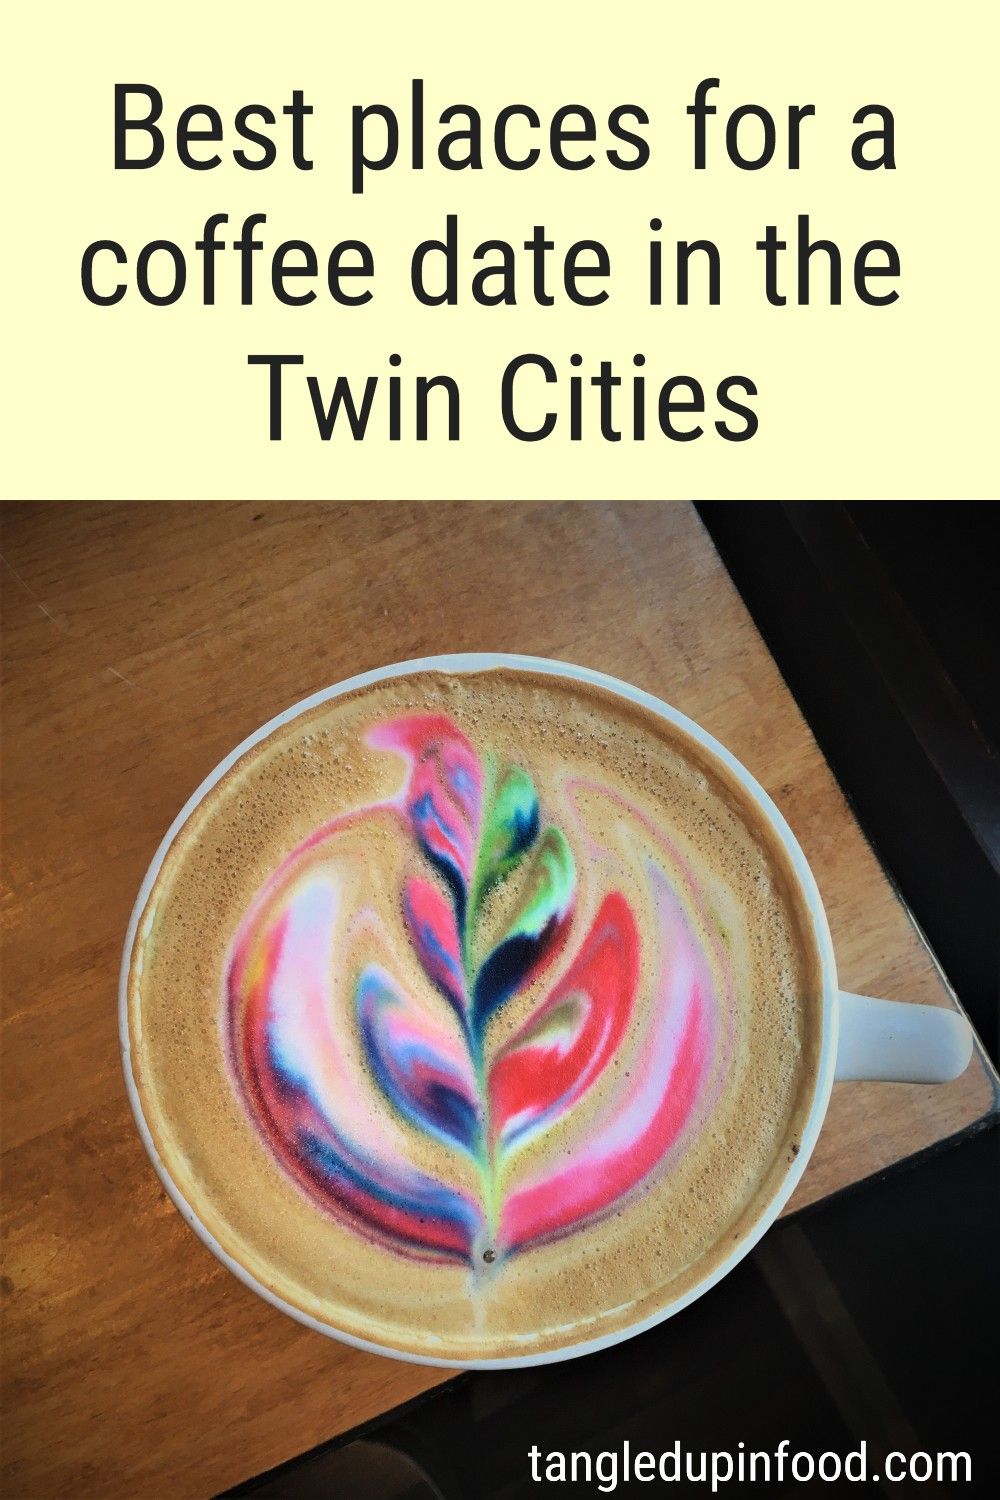 Latte with rainbow latte art and text reading "Best places for a coffee date in the Twin Cities"